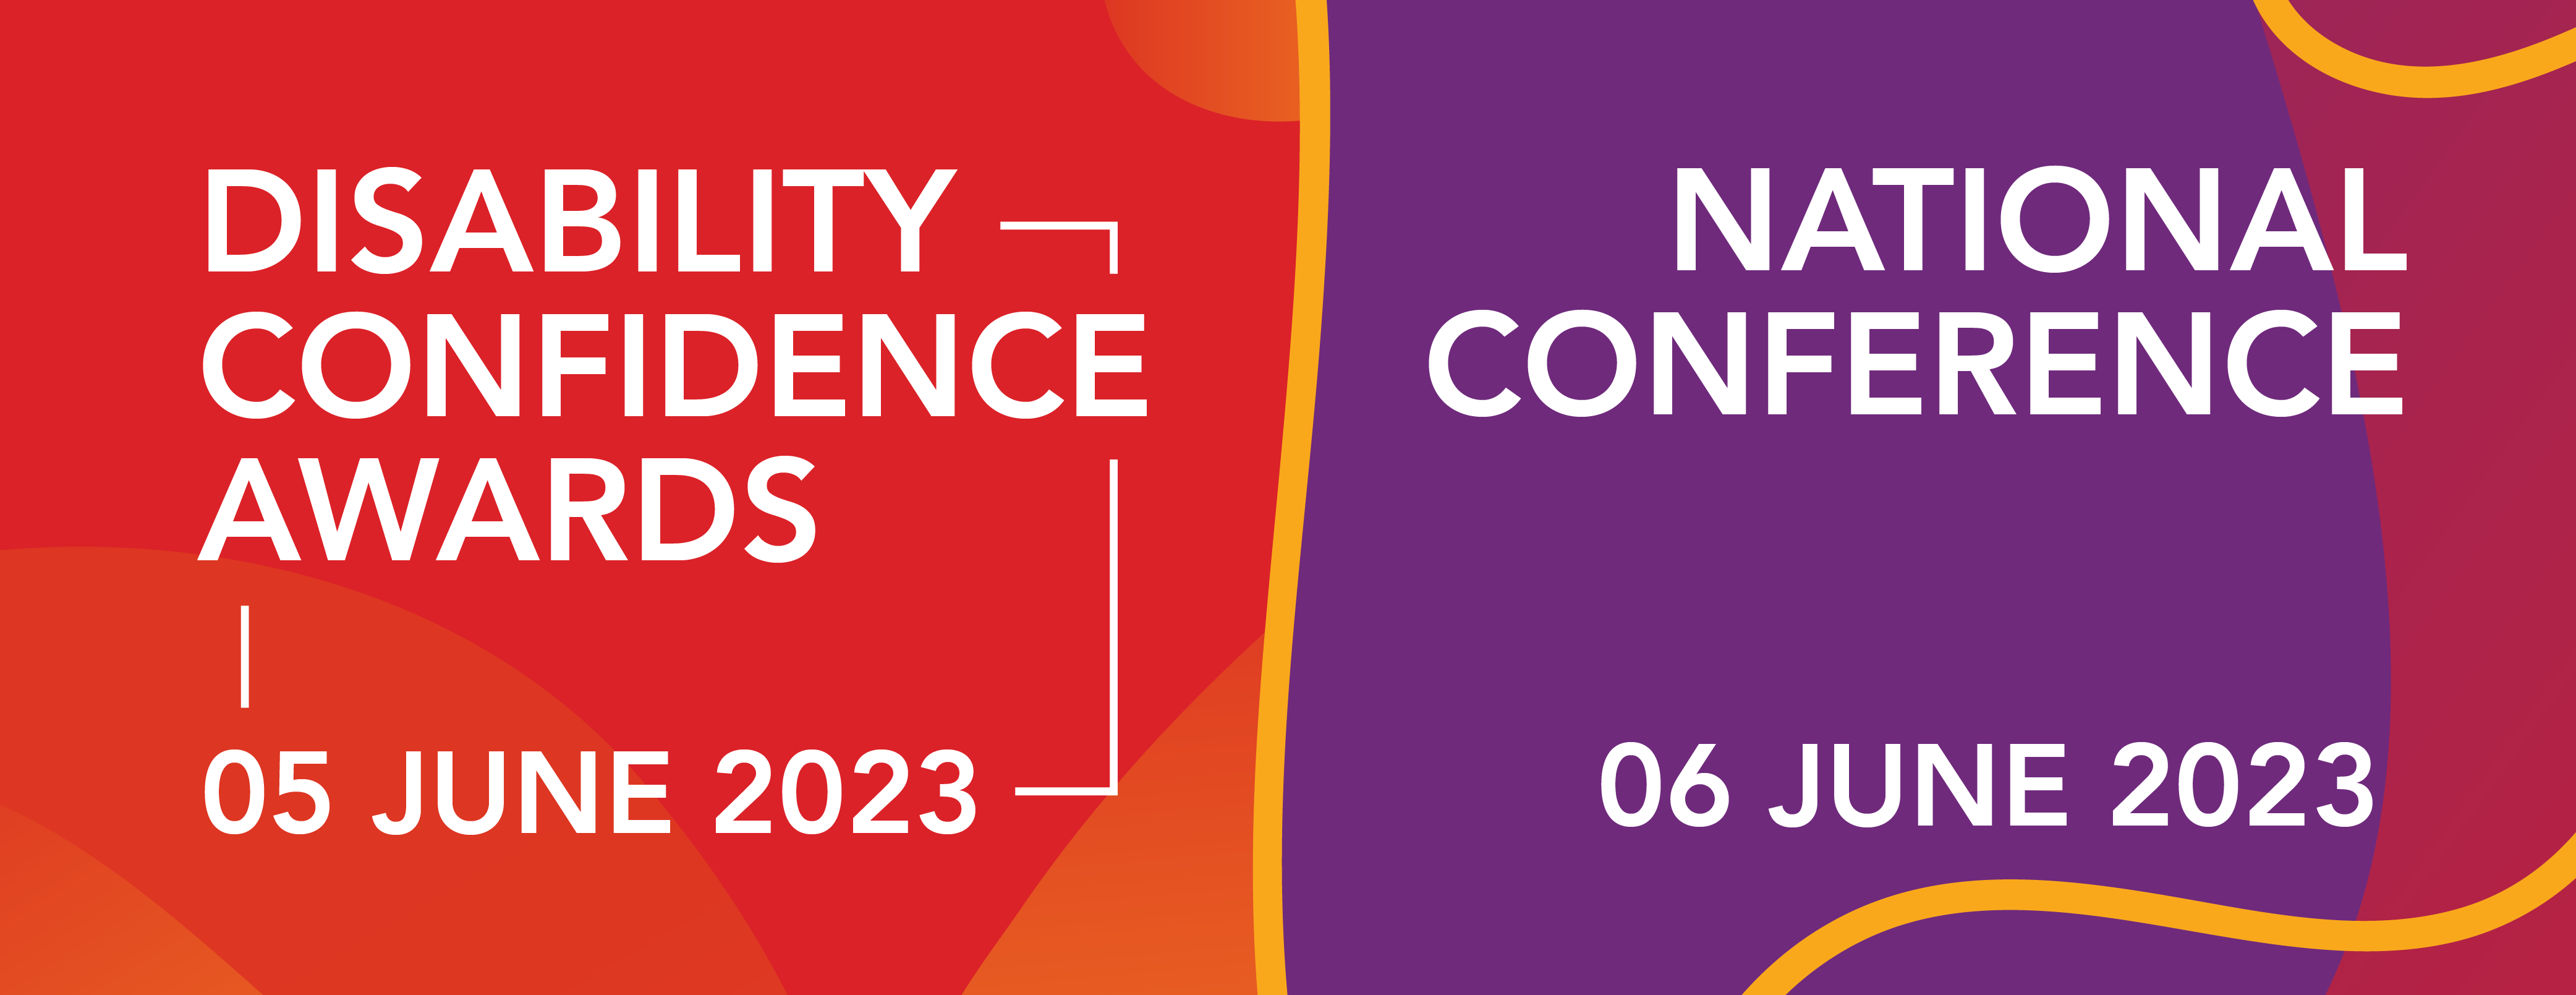 Disability Confidence Awards 5 June 2023 and National Conference 6 June 2023. 